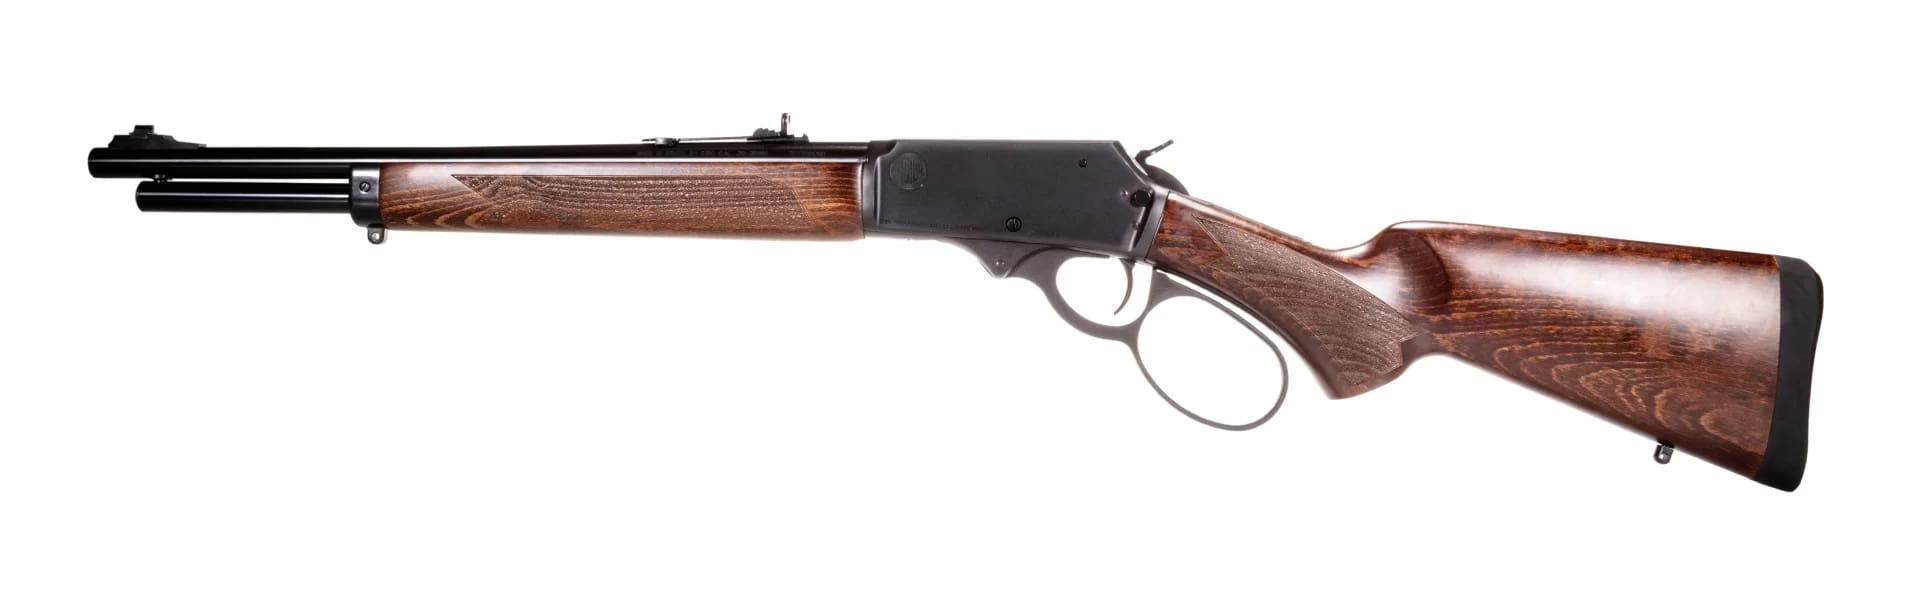 Rossi R95 lever action rifle 